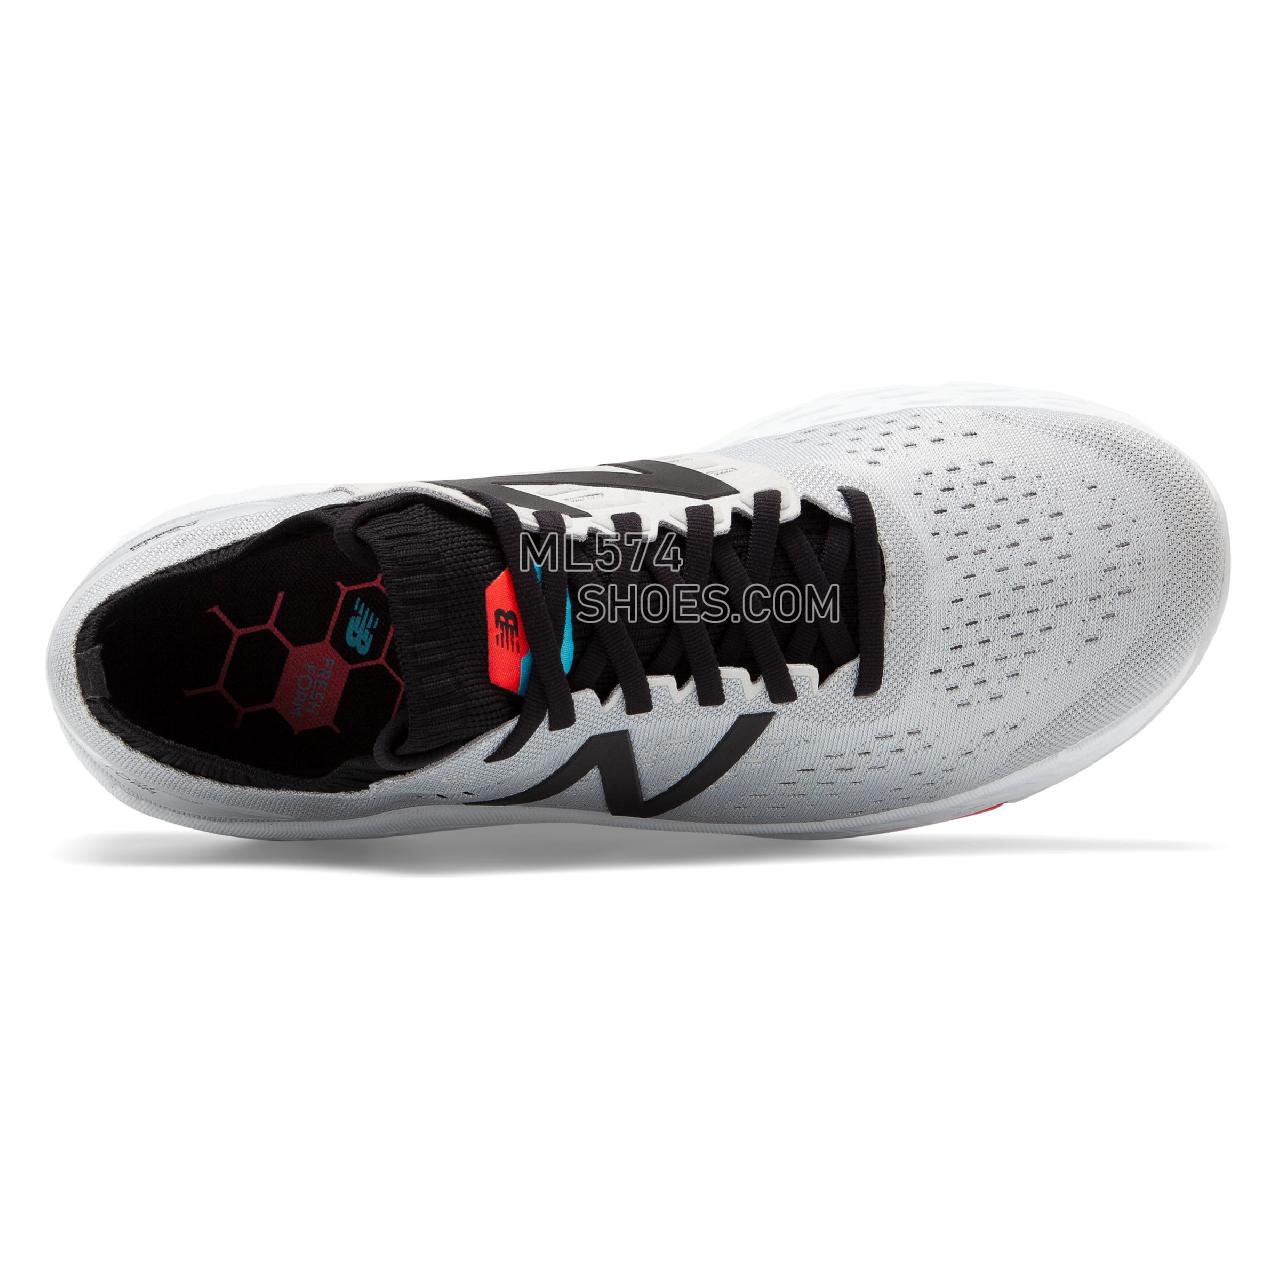 New Balance Fresh Foam Vongo v4 - Men's Stability Running - Light Aluminum with Black and Energy Red - MVNGOWG4